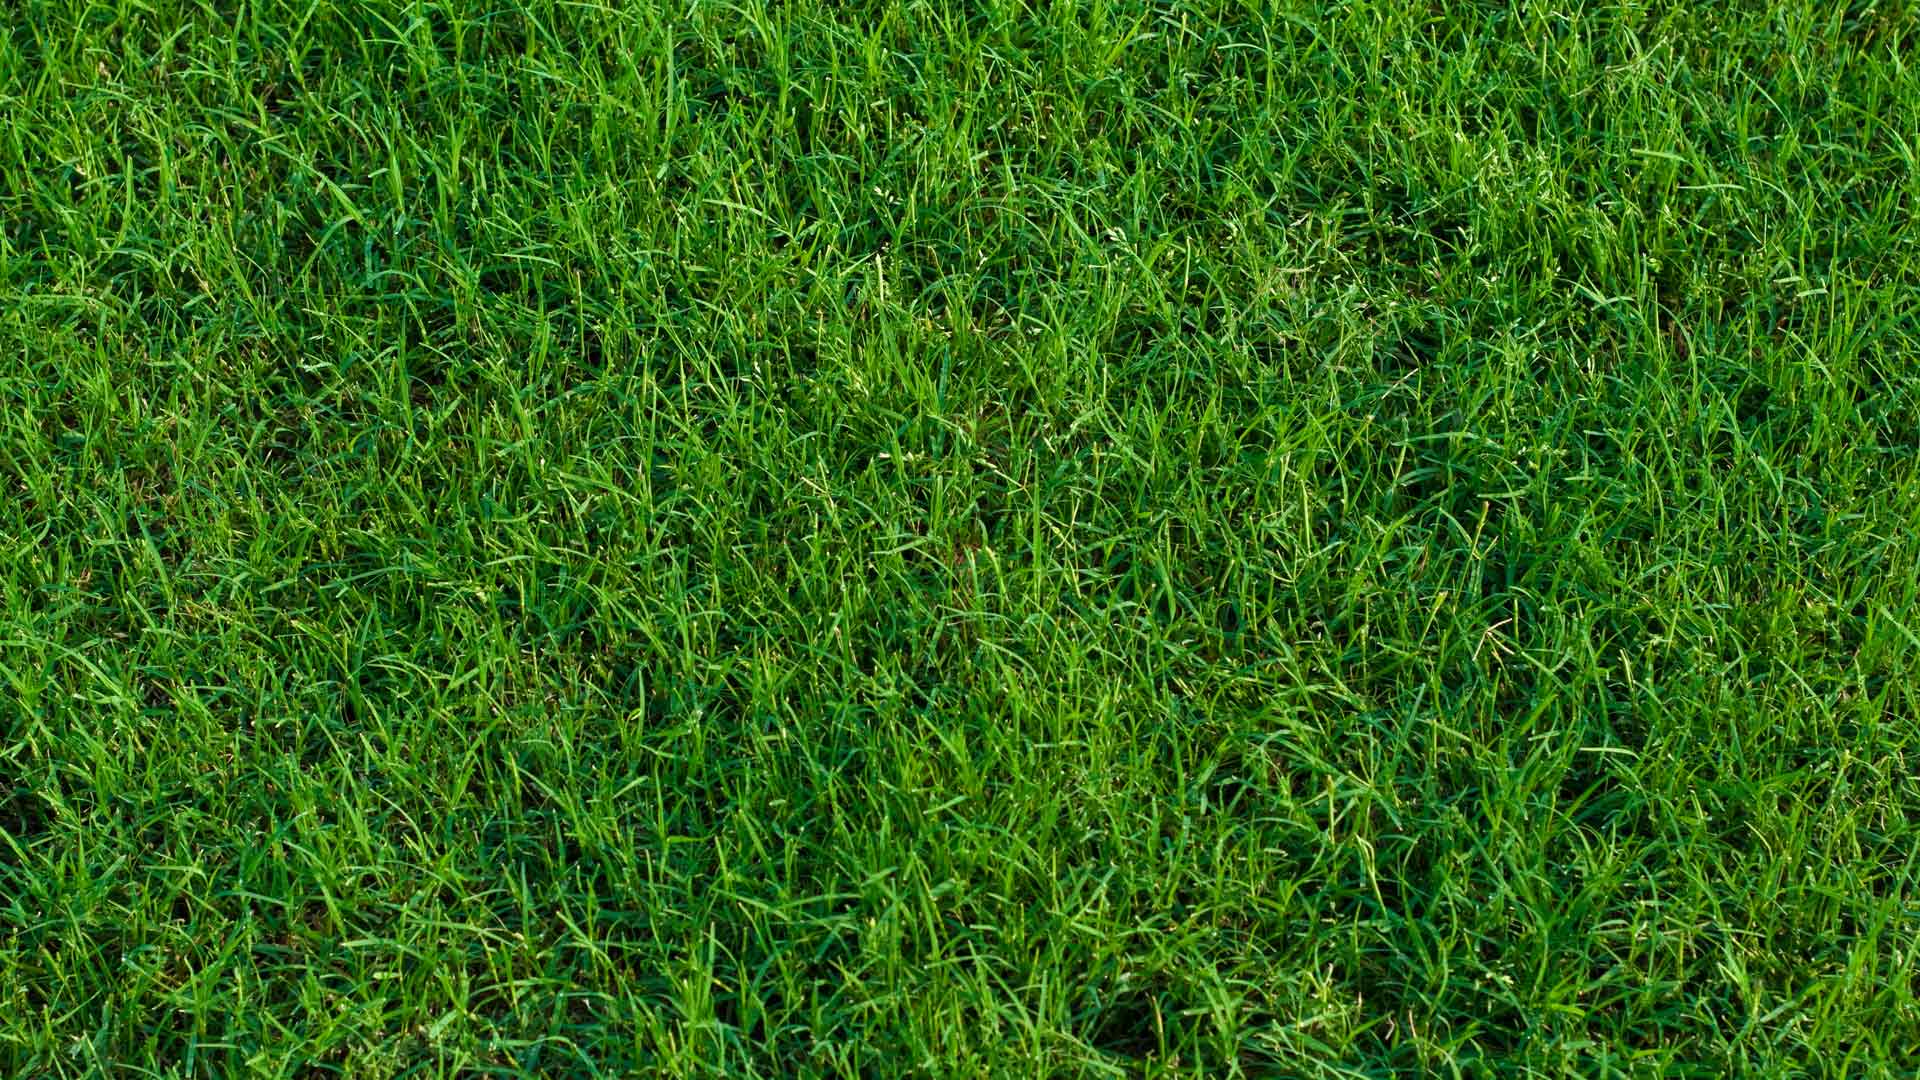 Is Your Lawn Comprised of Bermudagrass? You Should Aerate It This Spring!